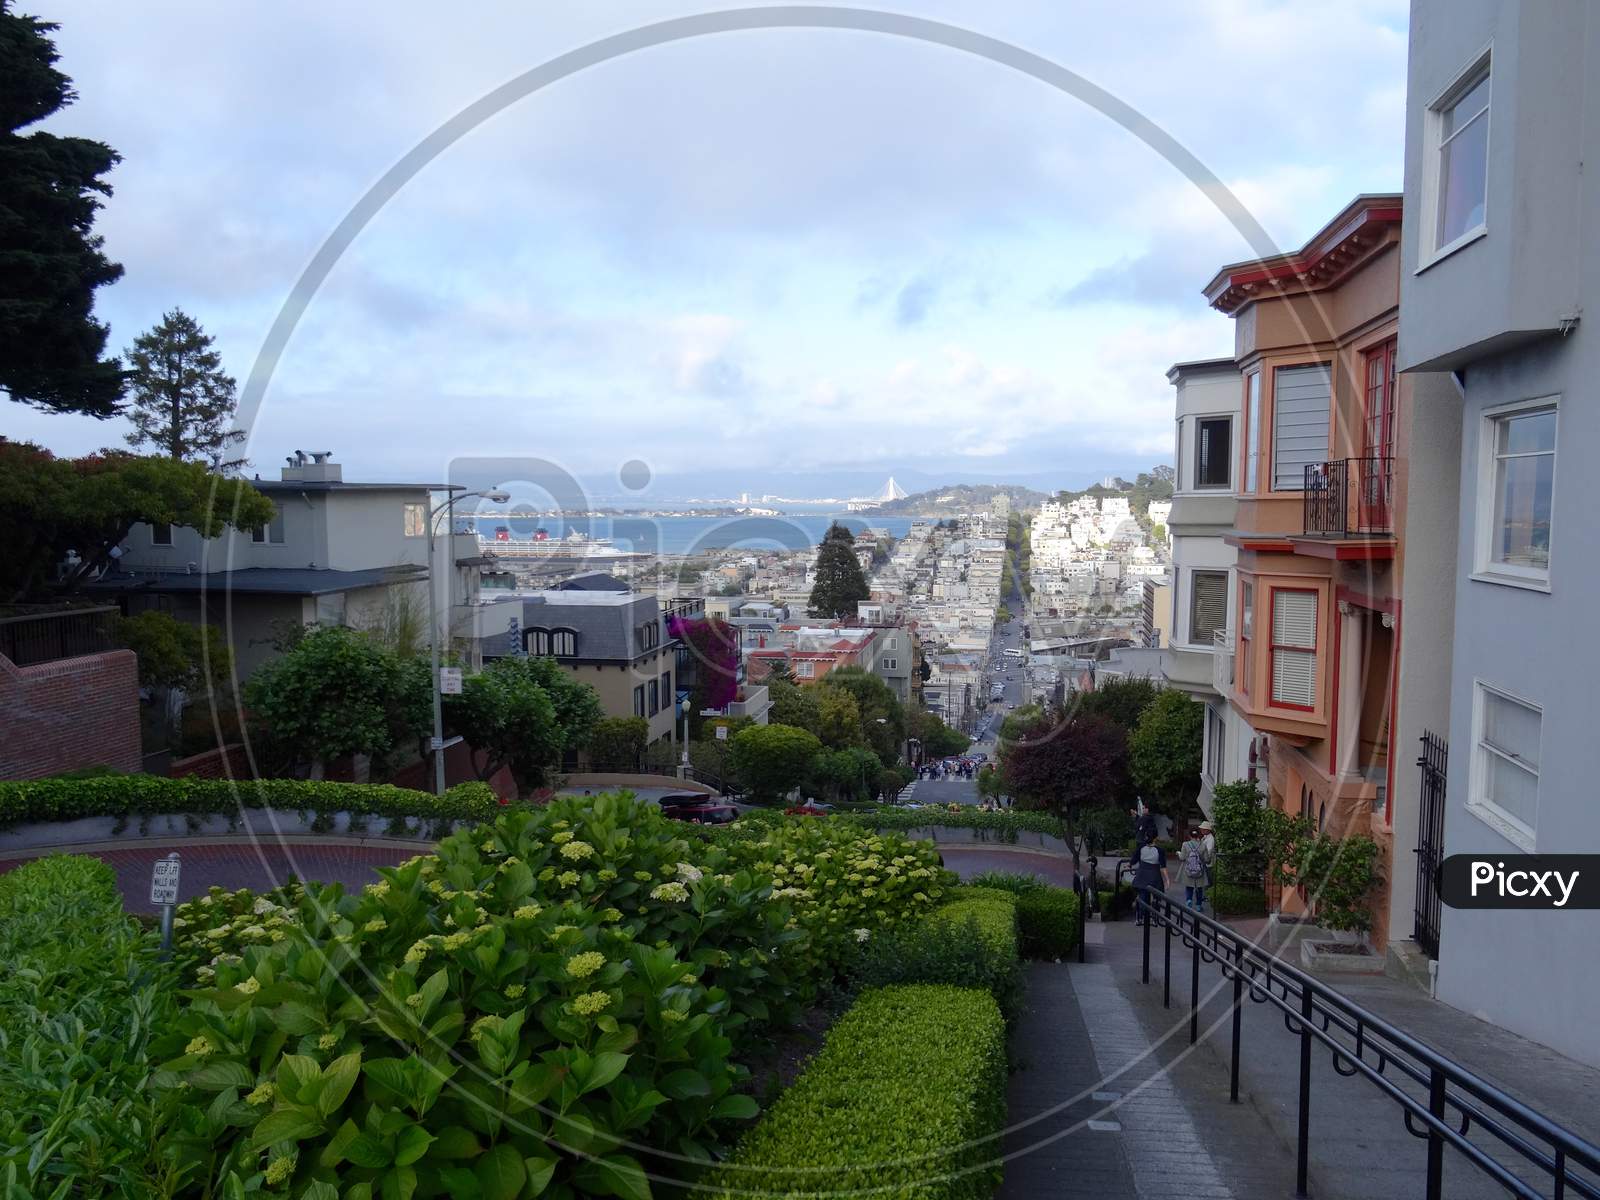 Panoramic View From Lombard Street In San Francisco